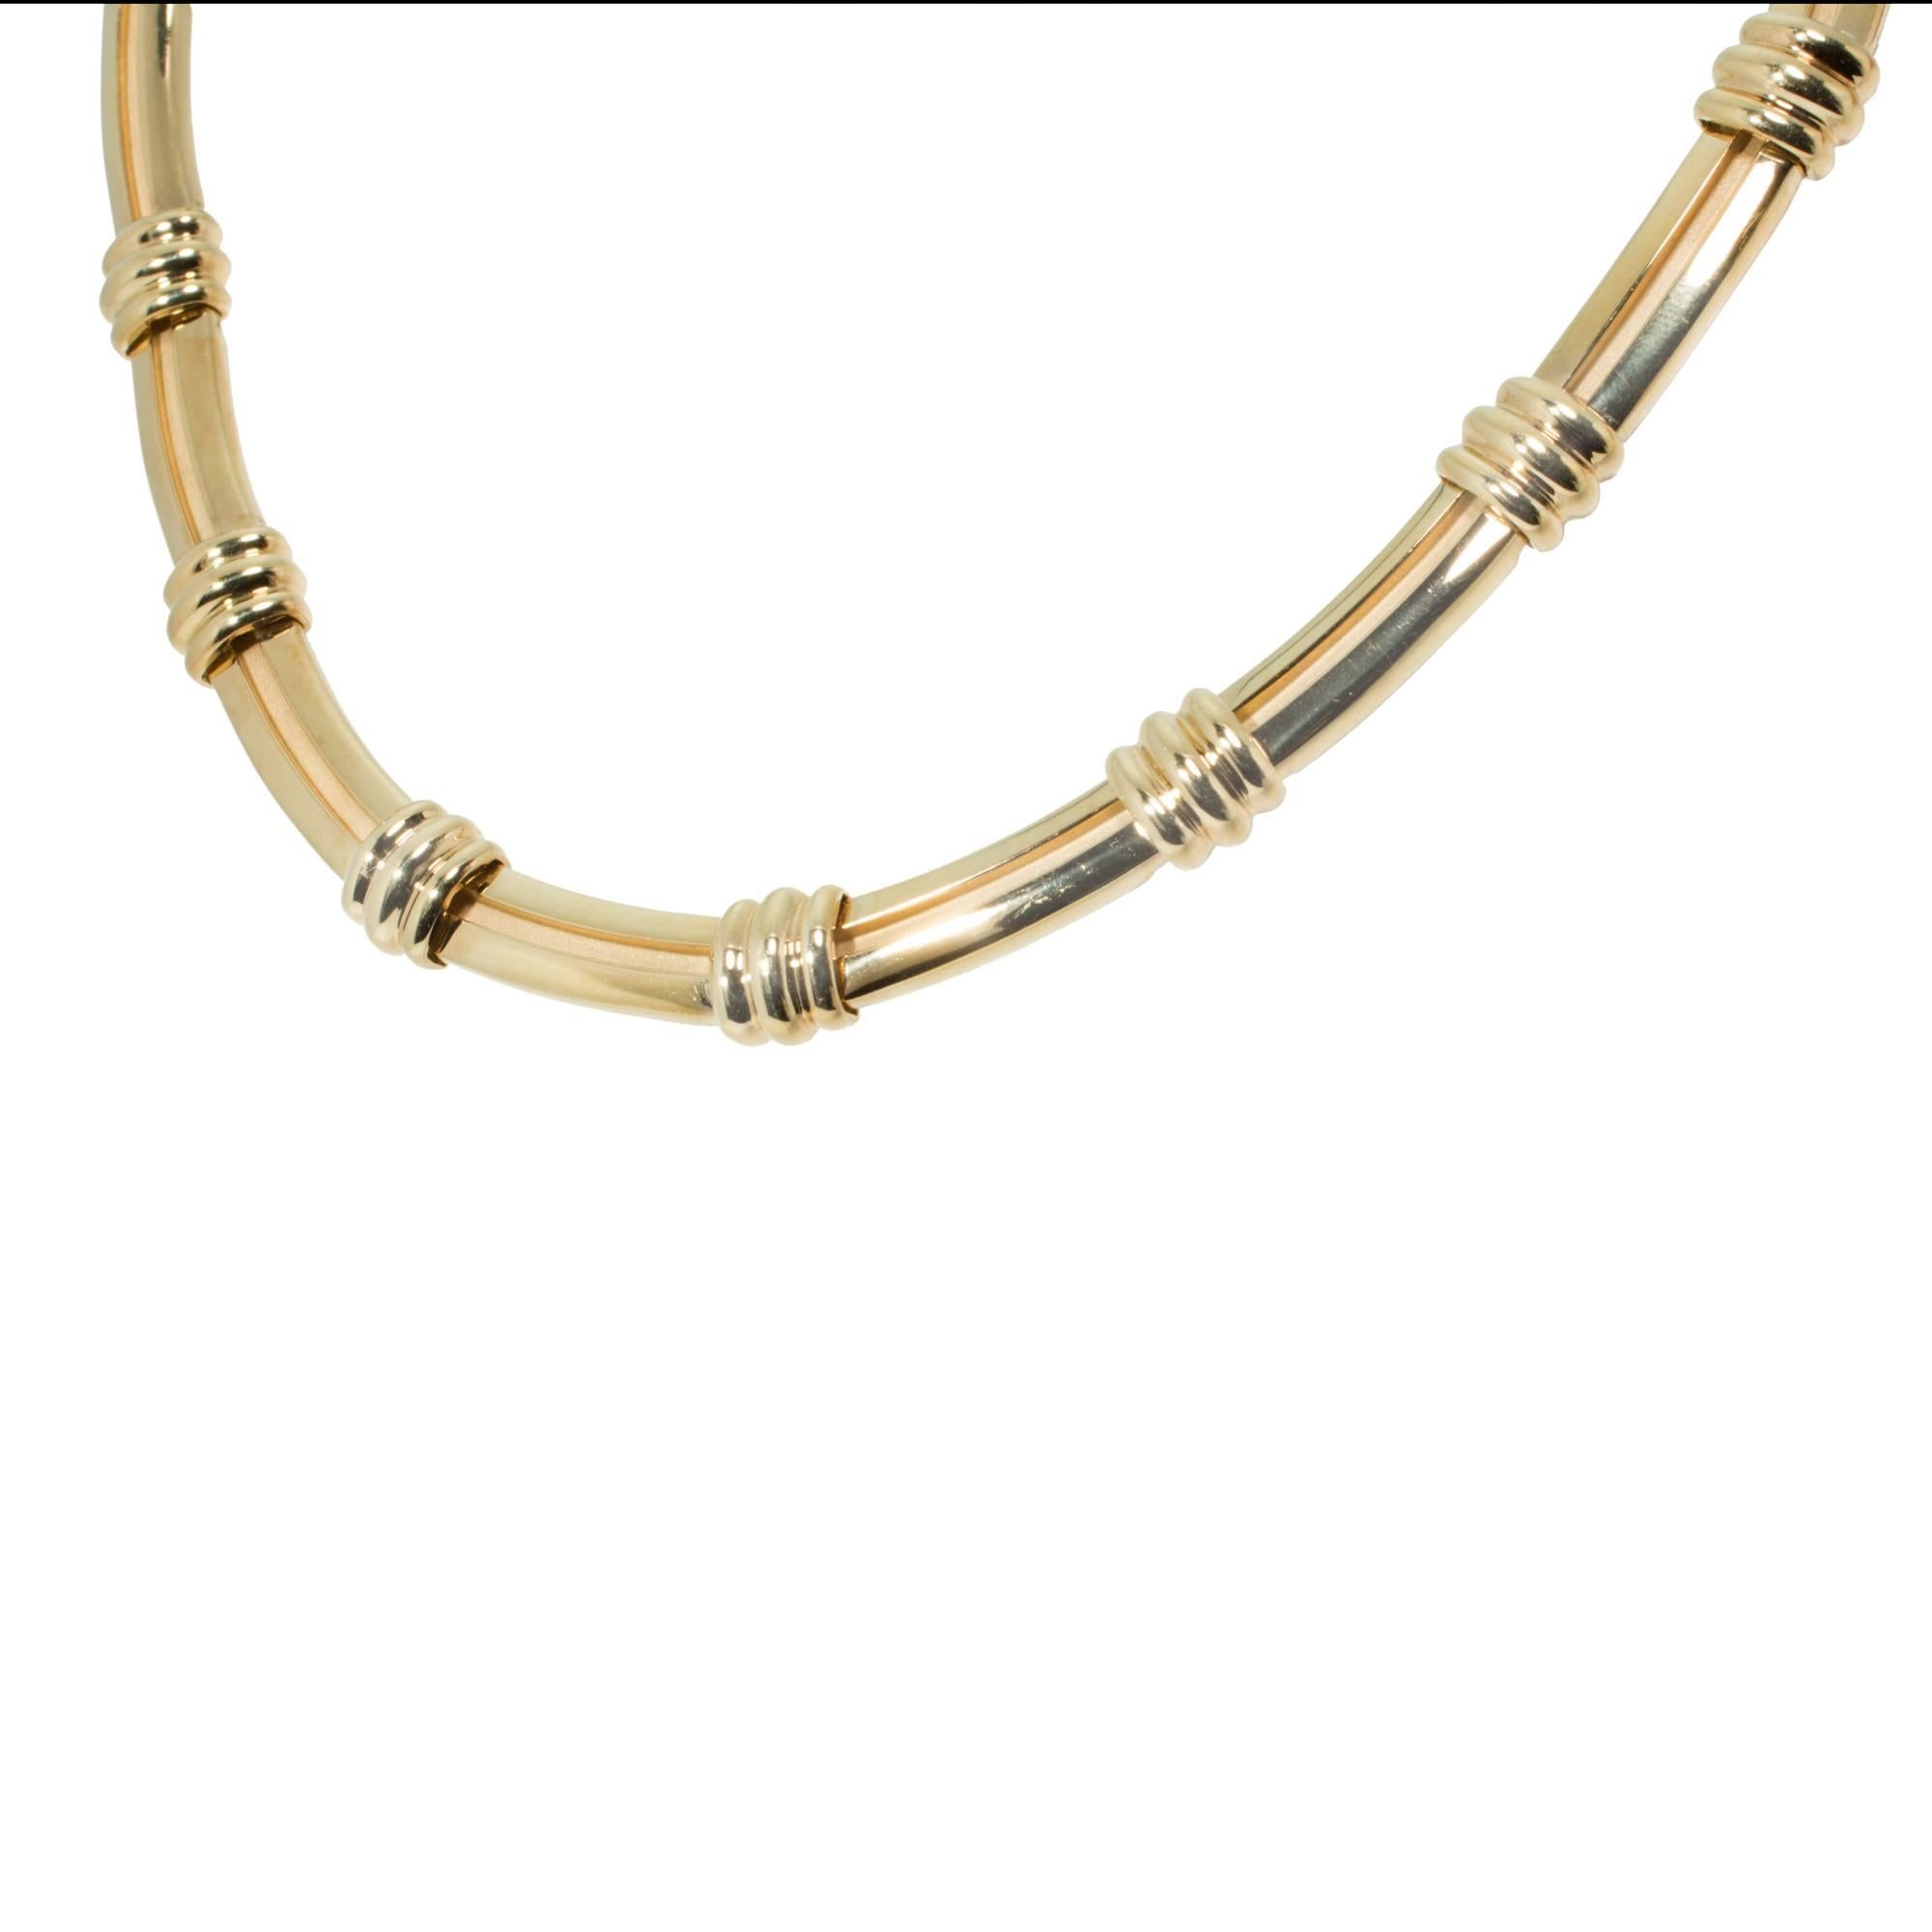 Tiffany & Co. 18k Yellow Gold Atlas Necklace

Length: 16.50 inches
Grams: 75.5
18k Yellow Gold
Stamped: 750
Hallmark: Tiffany + Co c1995
Width: 10.51
Thickness: 5.89

